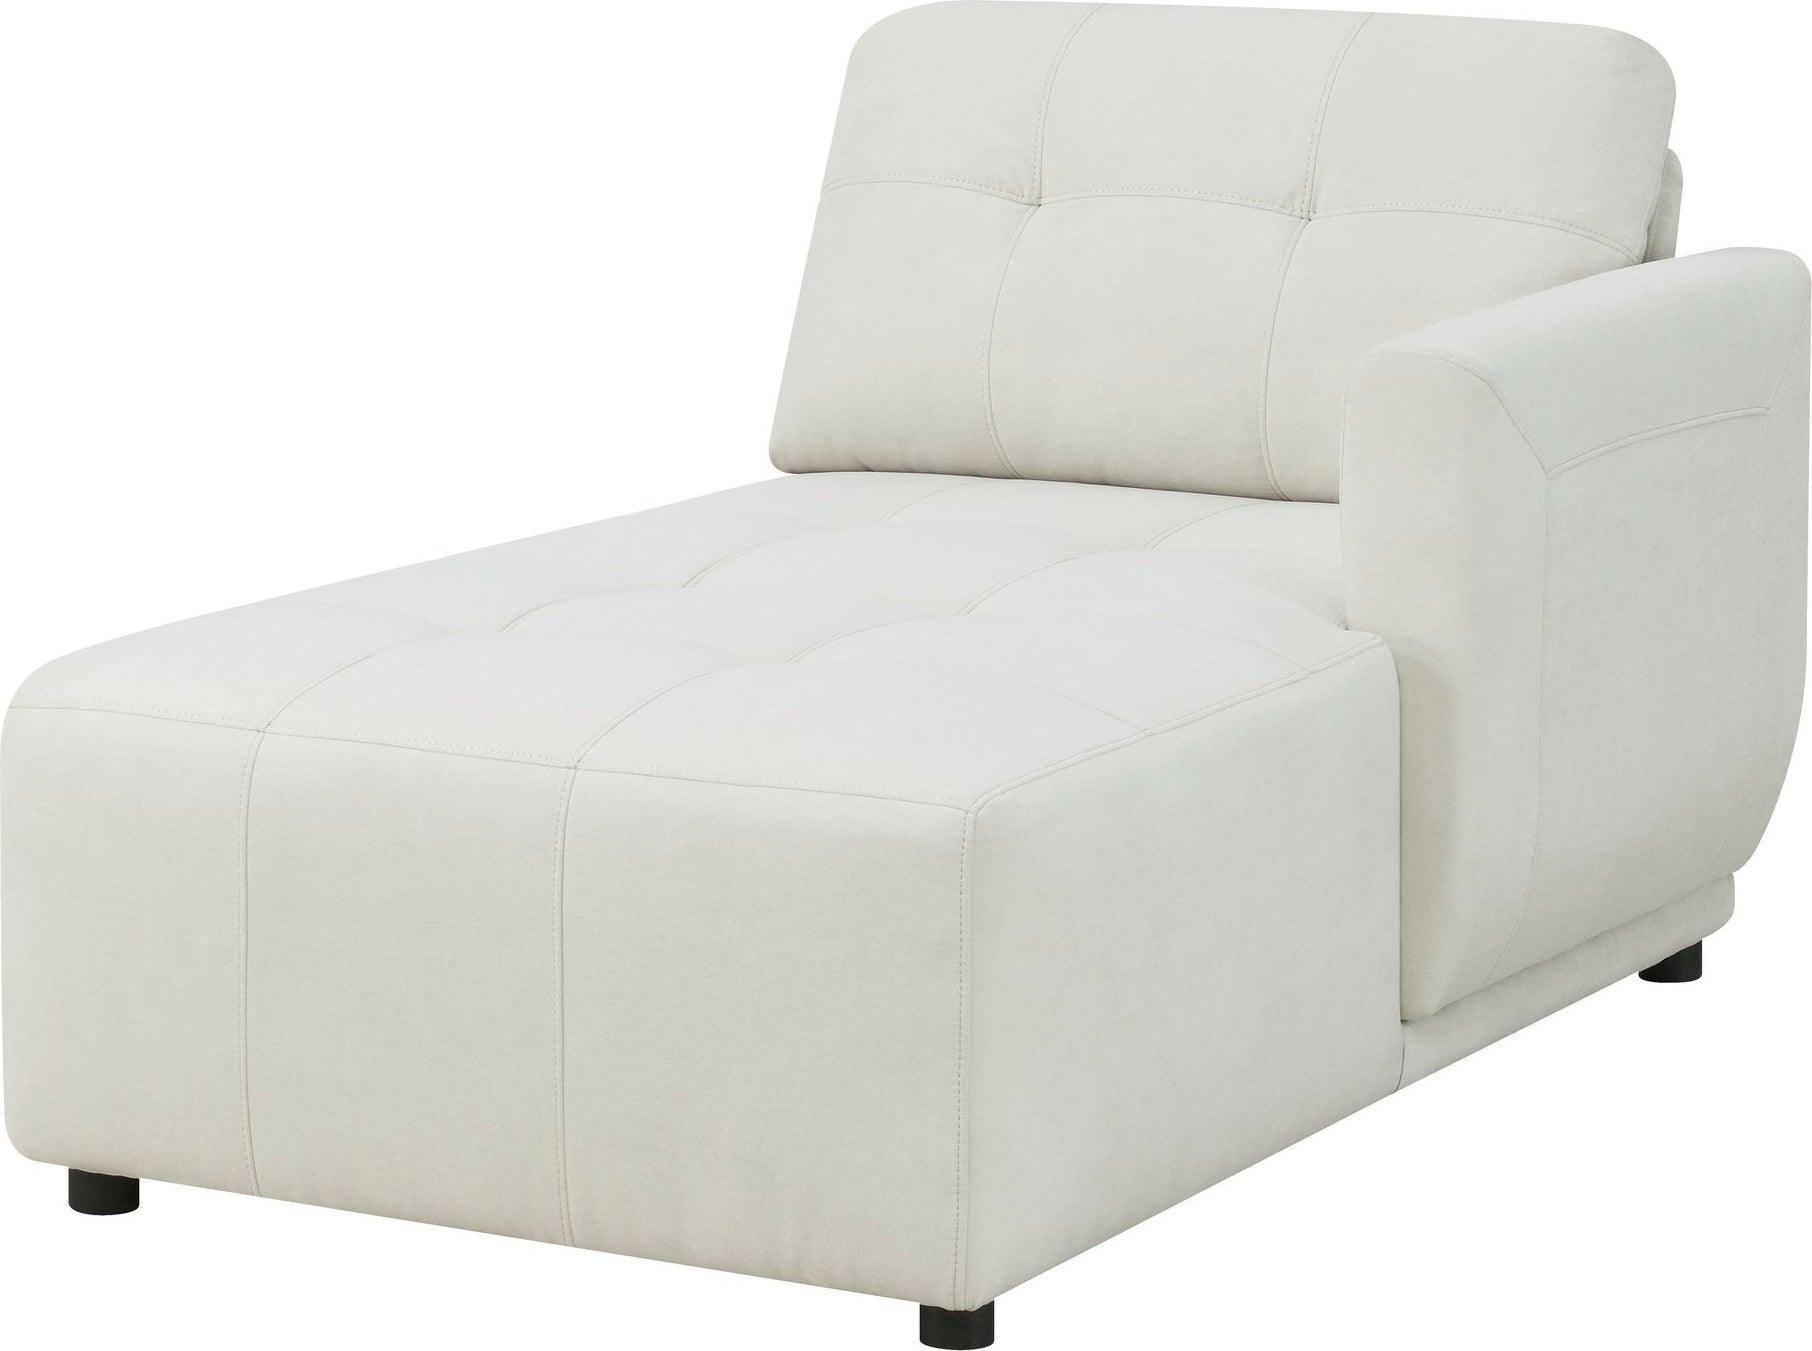 Elements Sleepers & Futons - Gianni Modular Right Hand Facing Chaise Natural